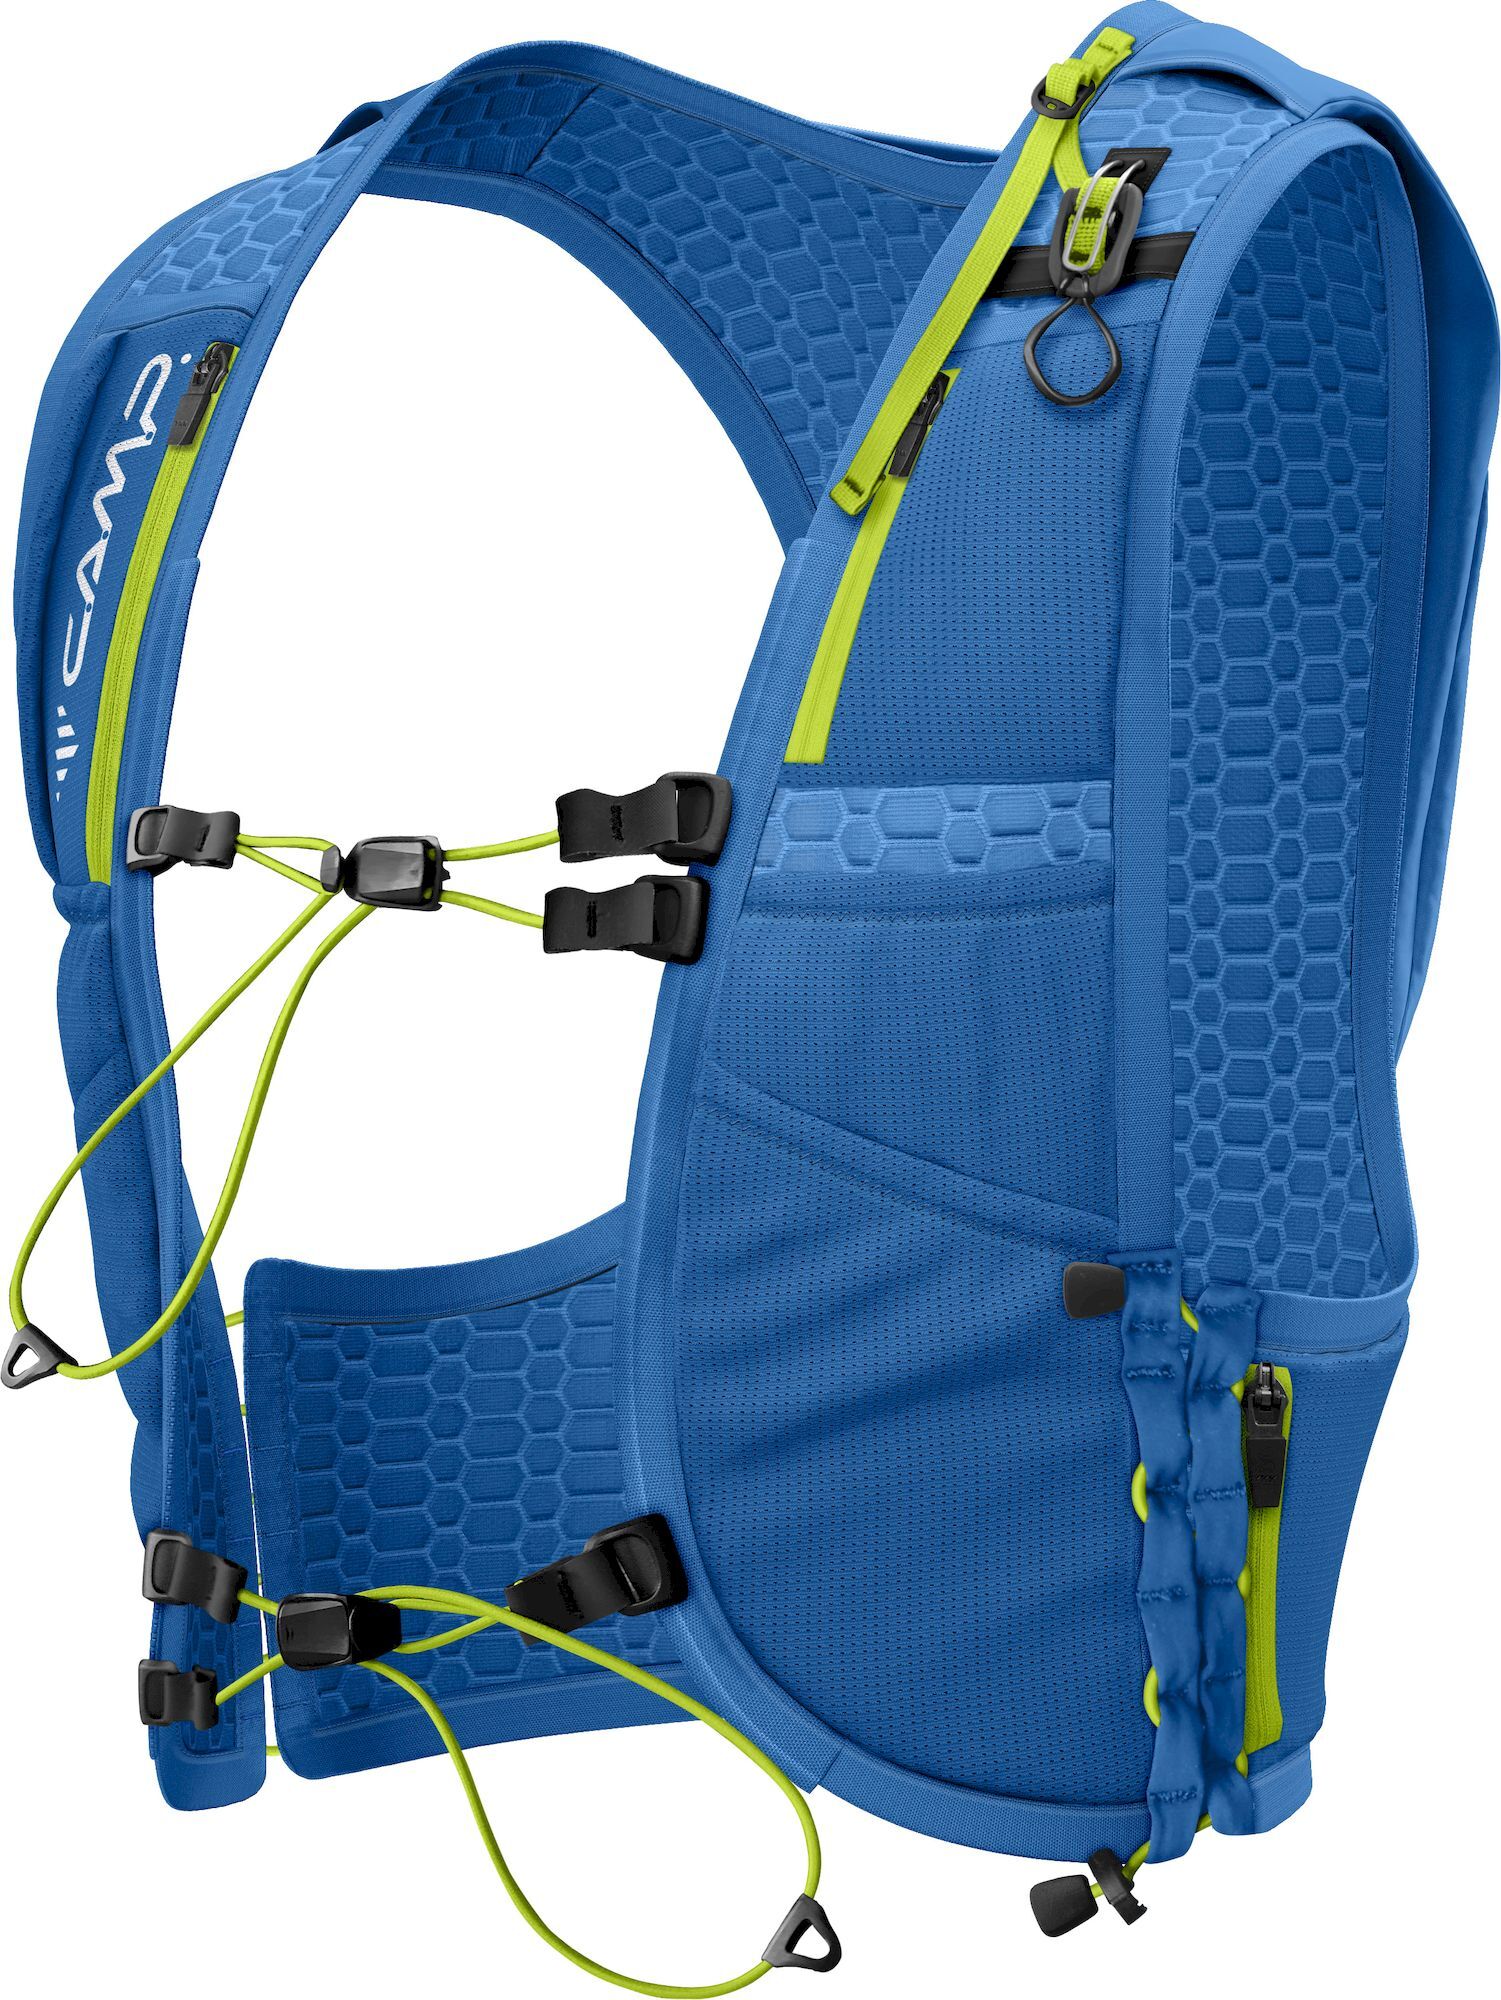 Camp Trail Force 5 - Trail running backpack | Hardloop